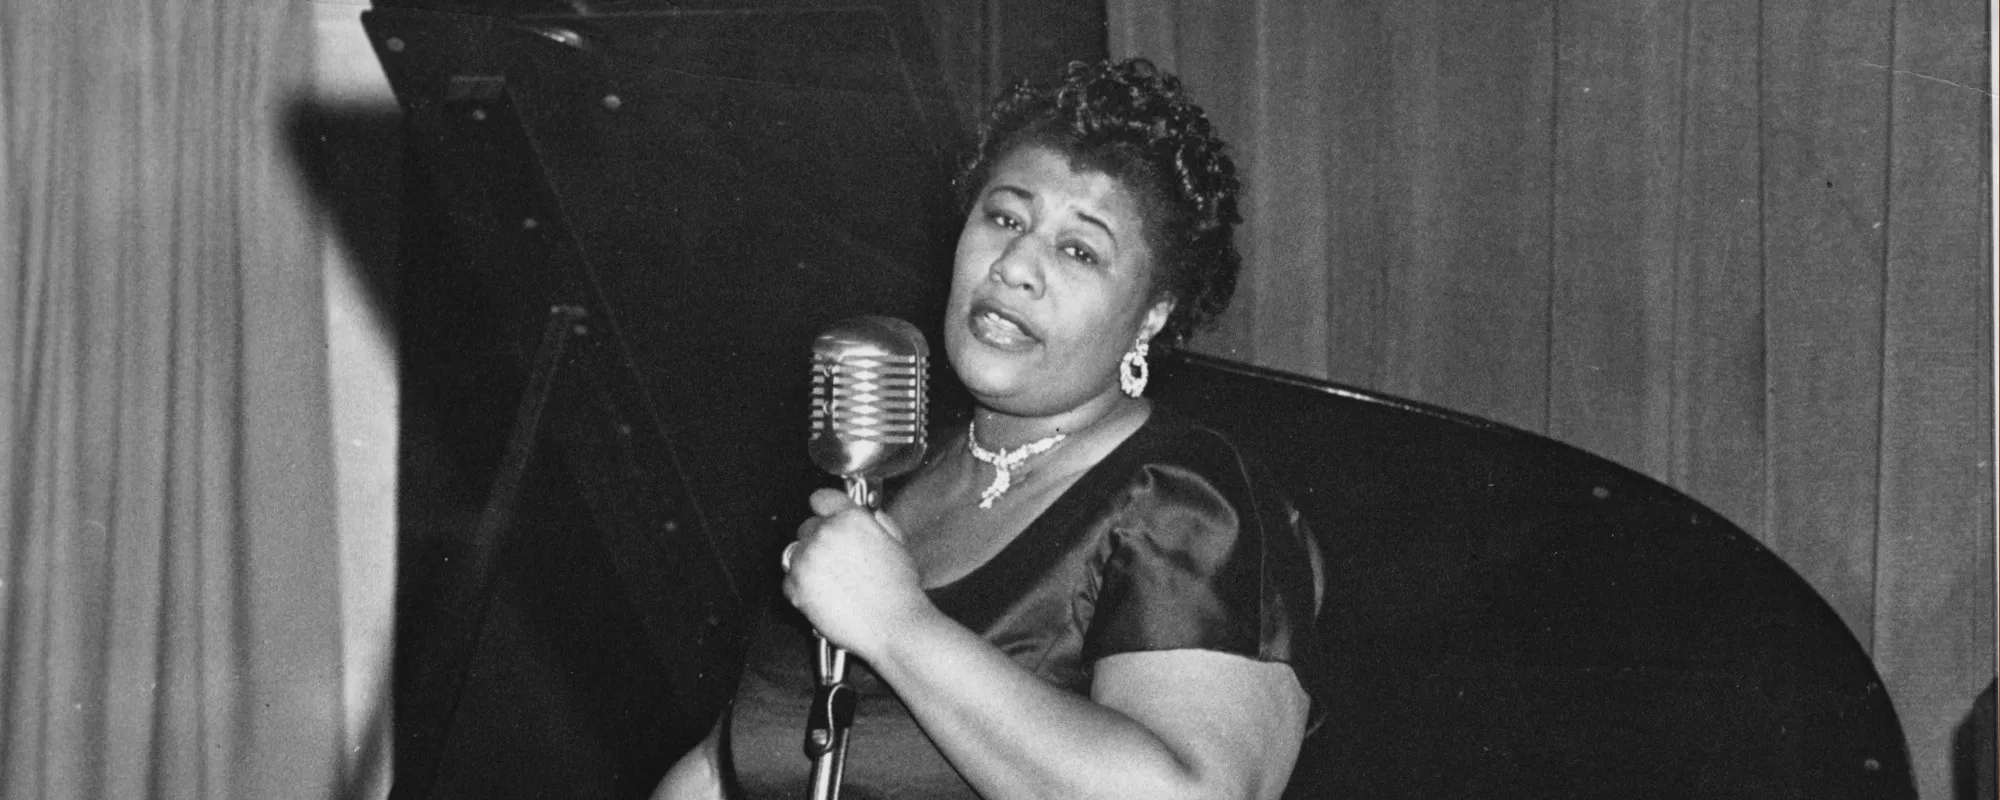 Ella Fitzgerald Live at Montreux 1969 Set to Drop in January